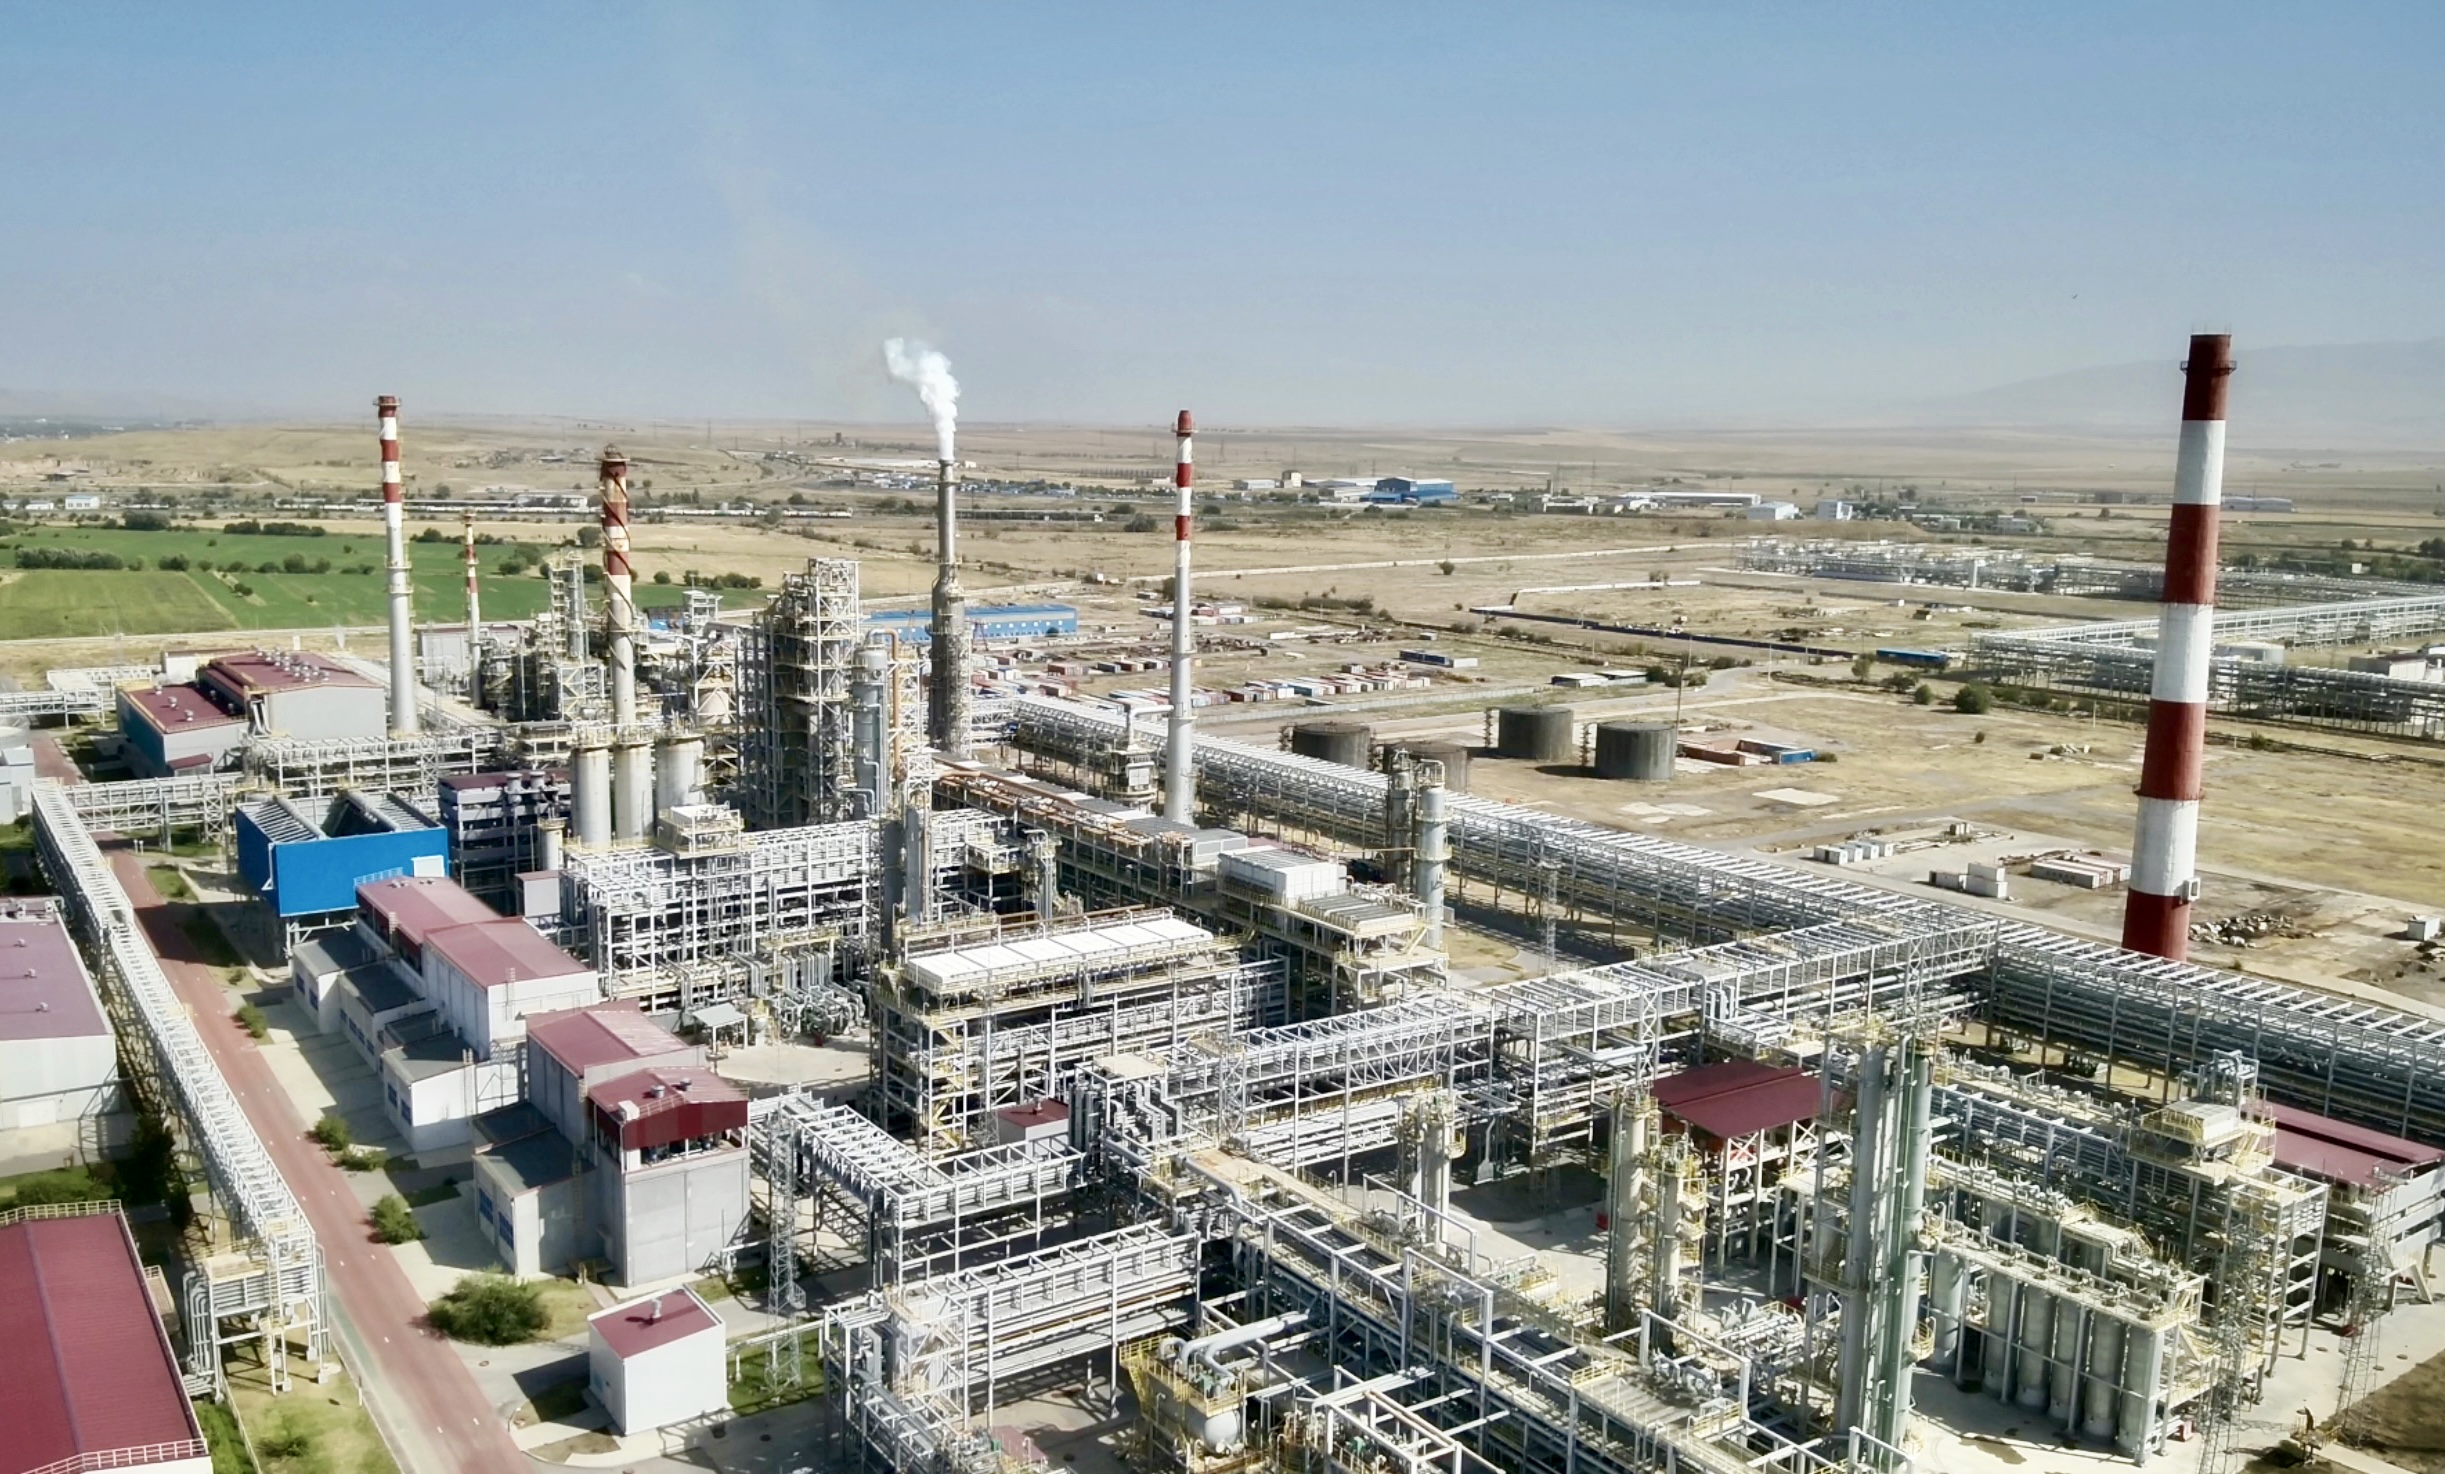 A view of the Shymkent Oil Refinery, a cornerstone of Kazakhstan's energy infrastructure. /CGTN